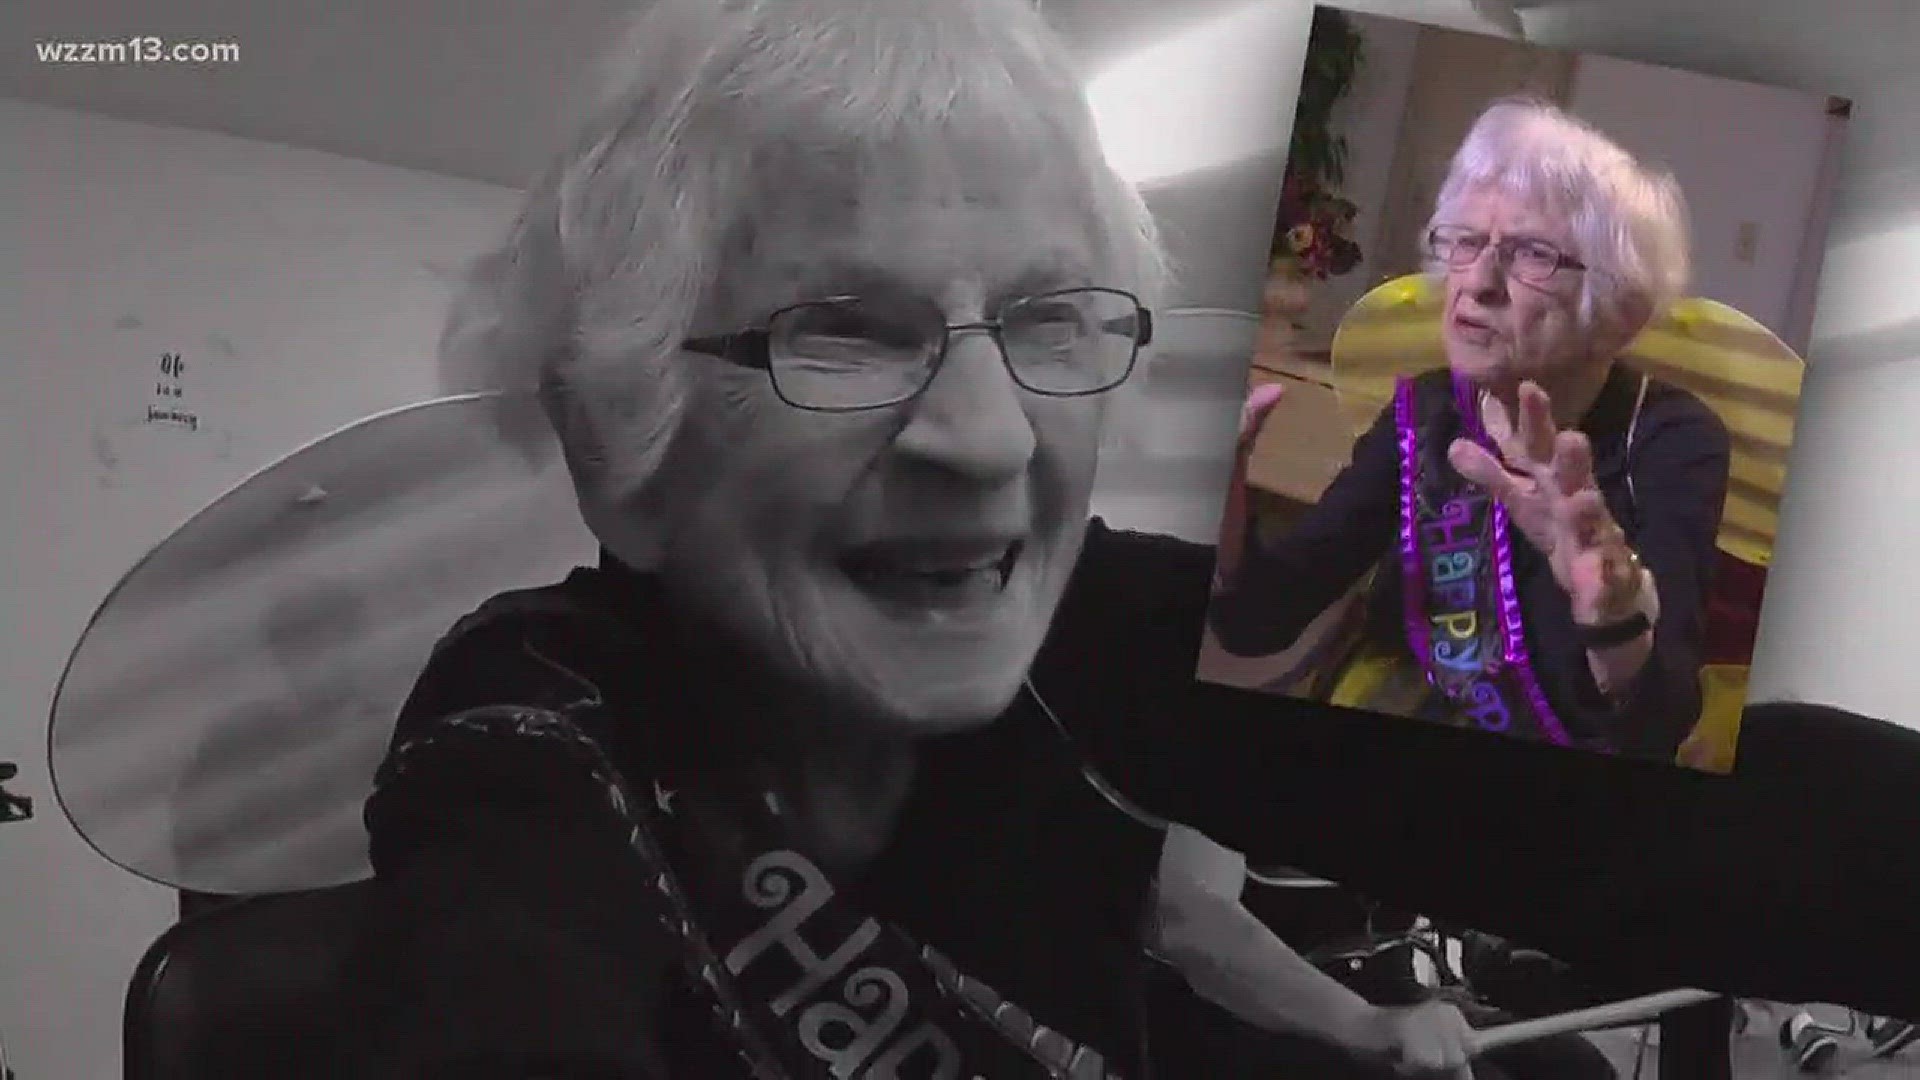 Gladys ran her first 5K when she was turning 100. Today, she celebrated her 104th birthday.